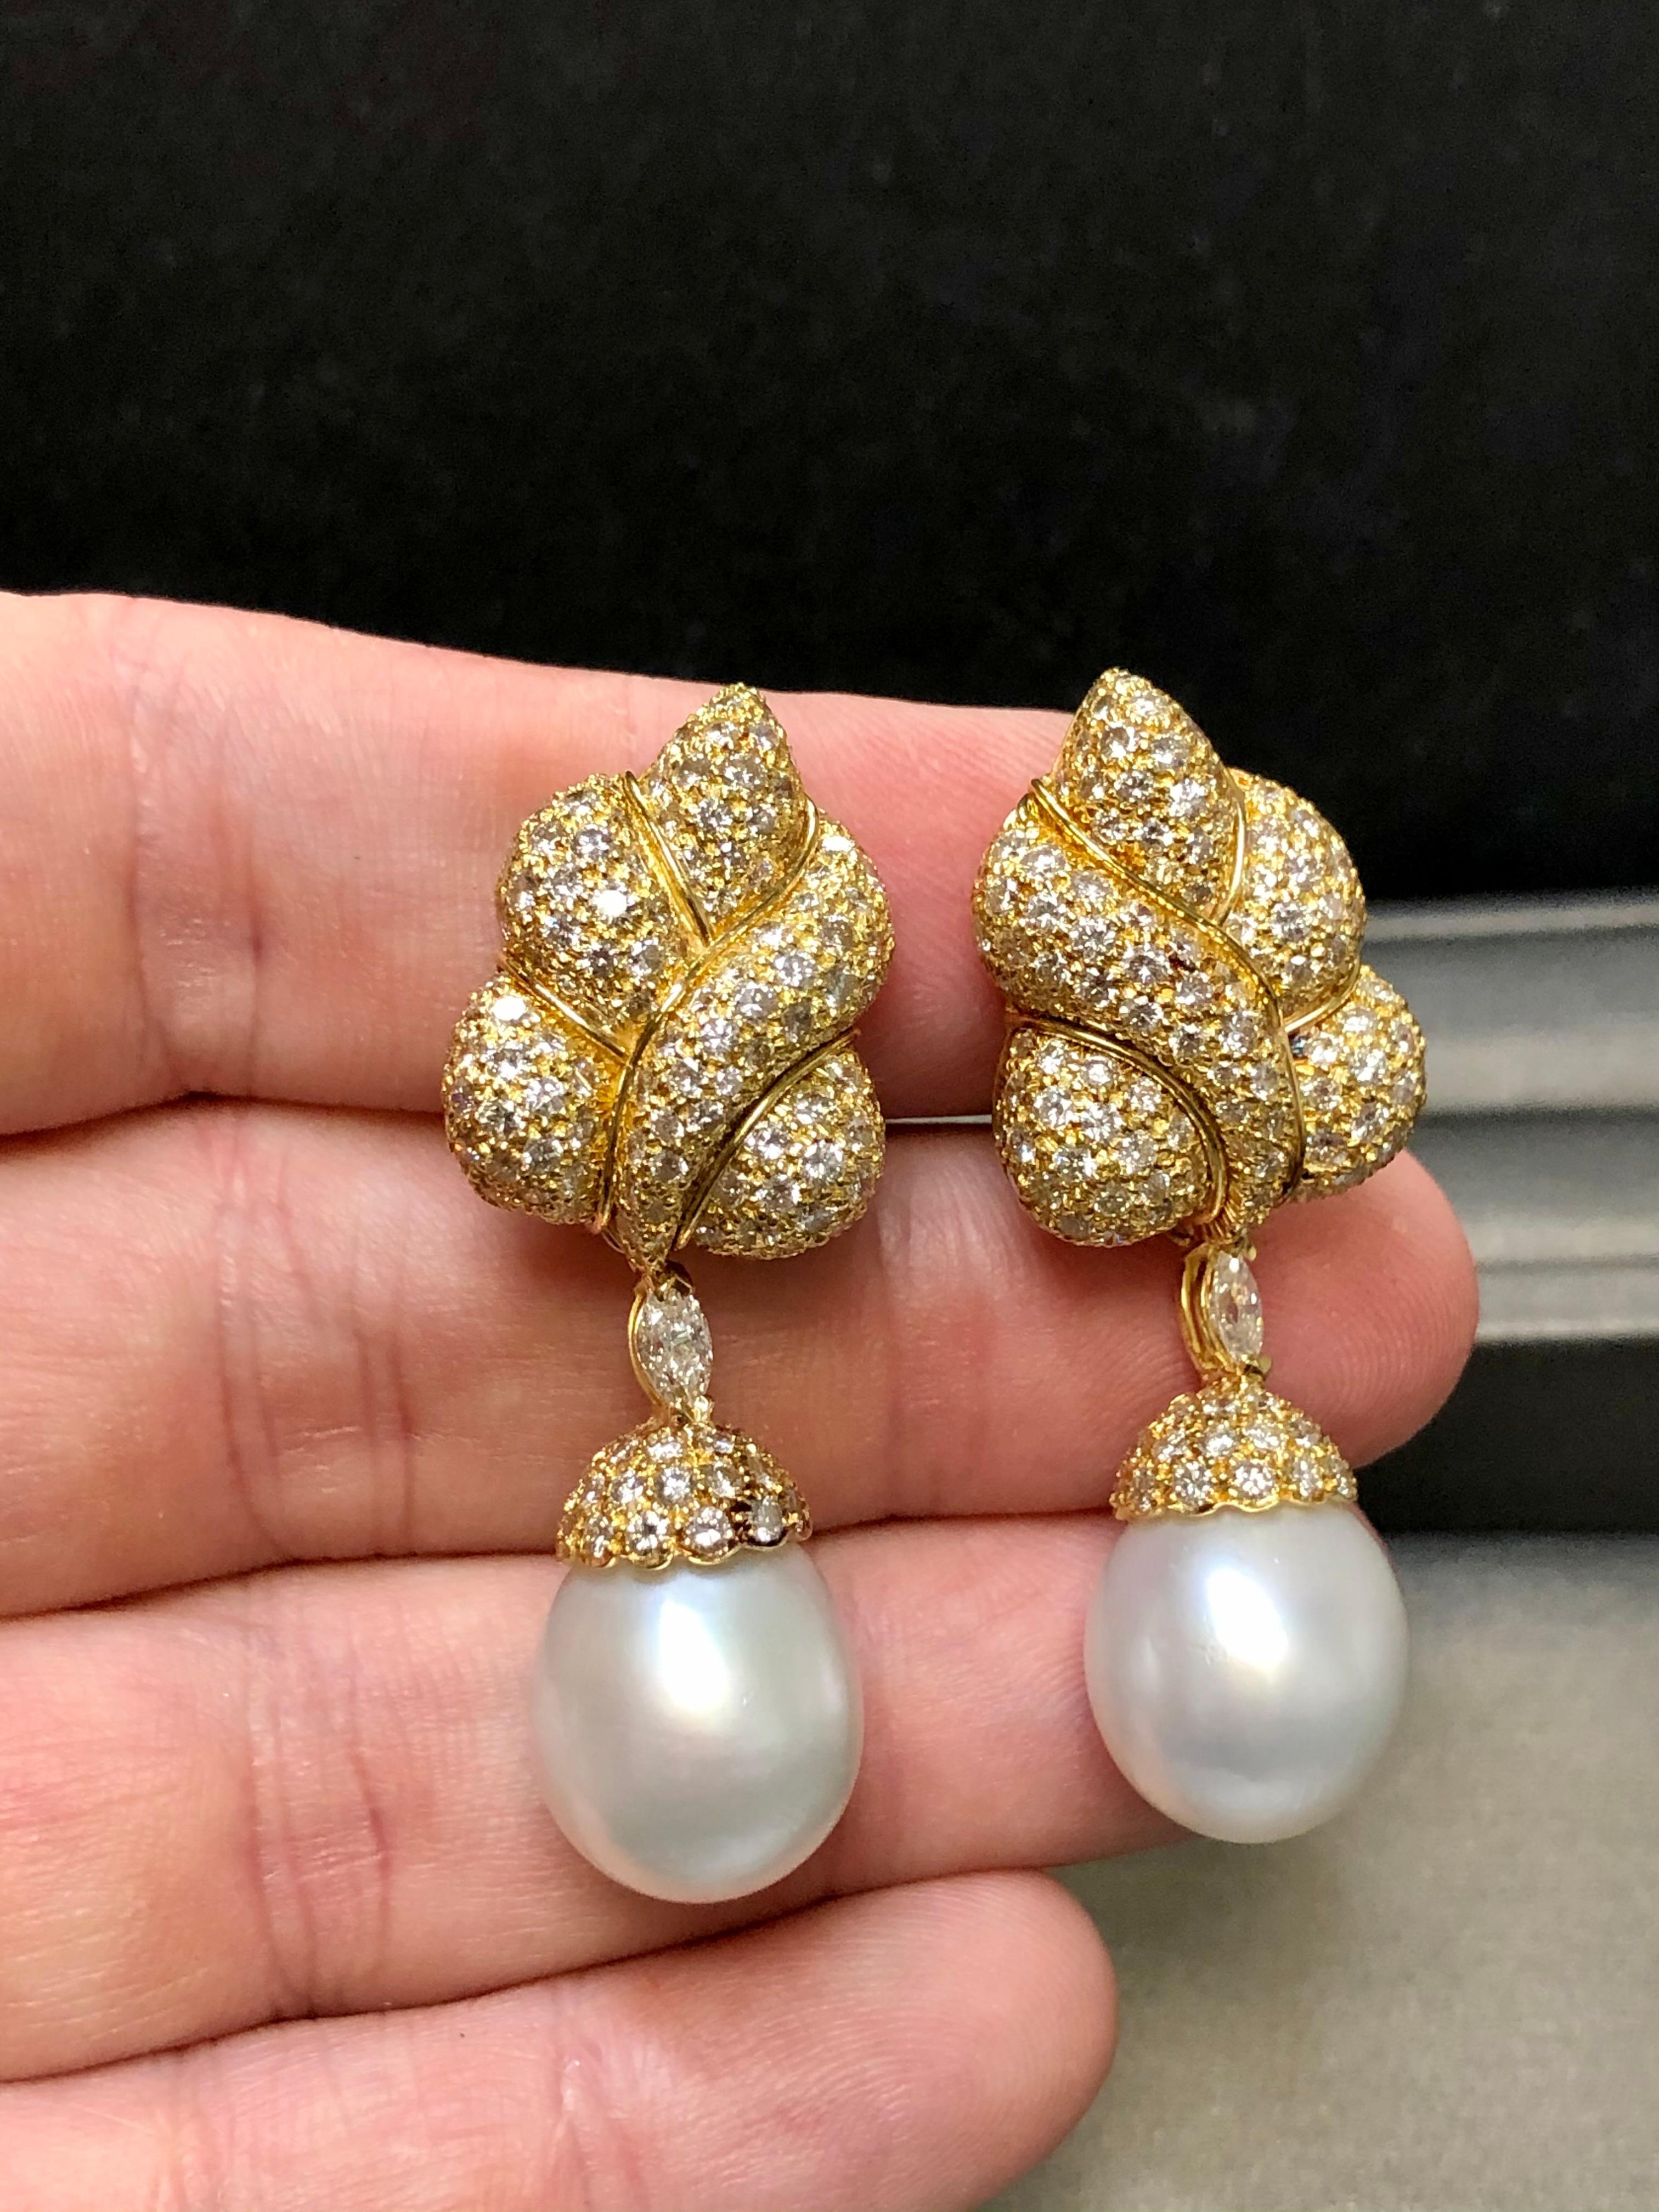 Estate GIOVANE 18k Diamond South Sea Pearl Day Night Drop Earrings 7.70cttw In Excellent Condition For Sale In Winter Springs, FL